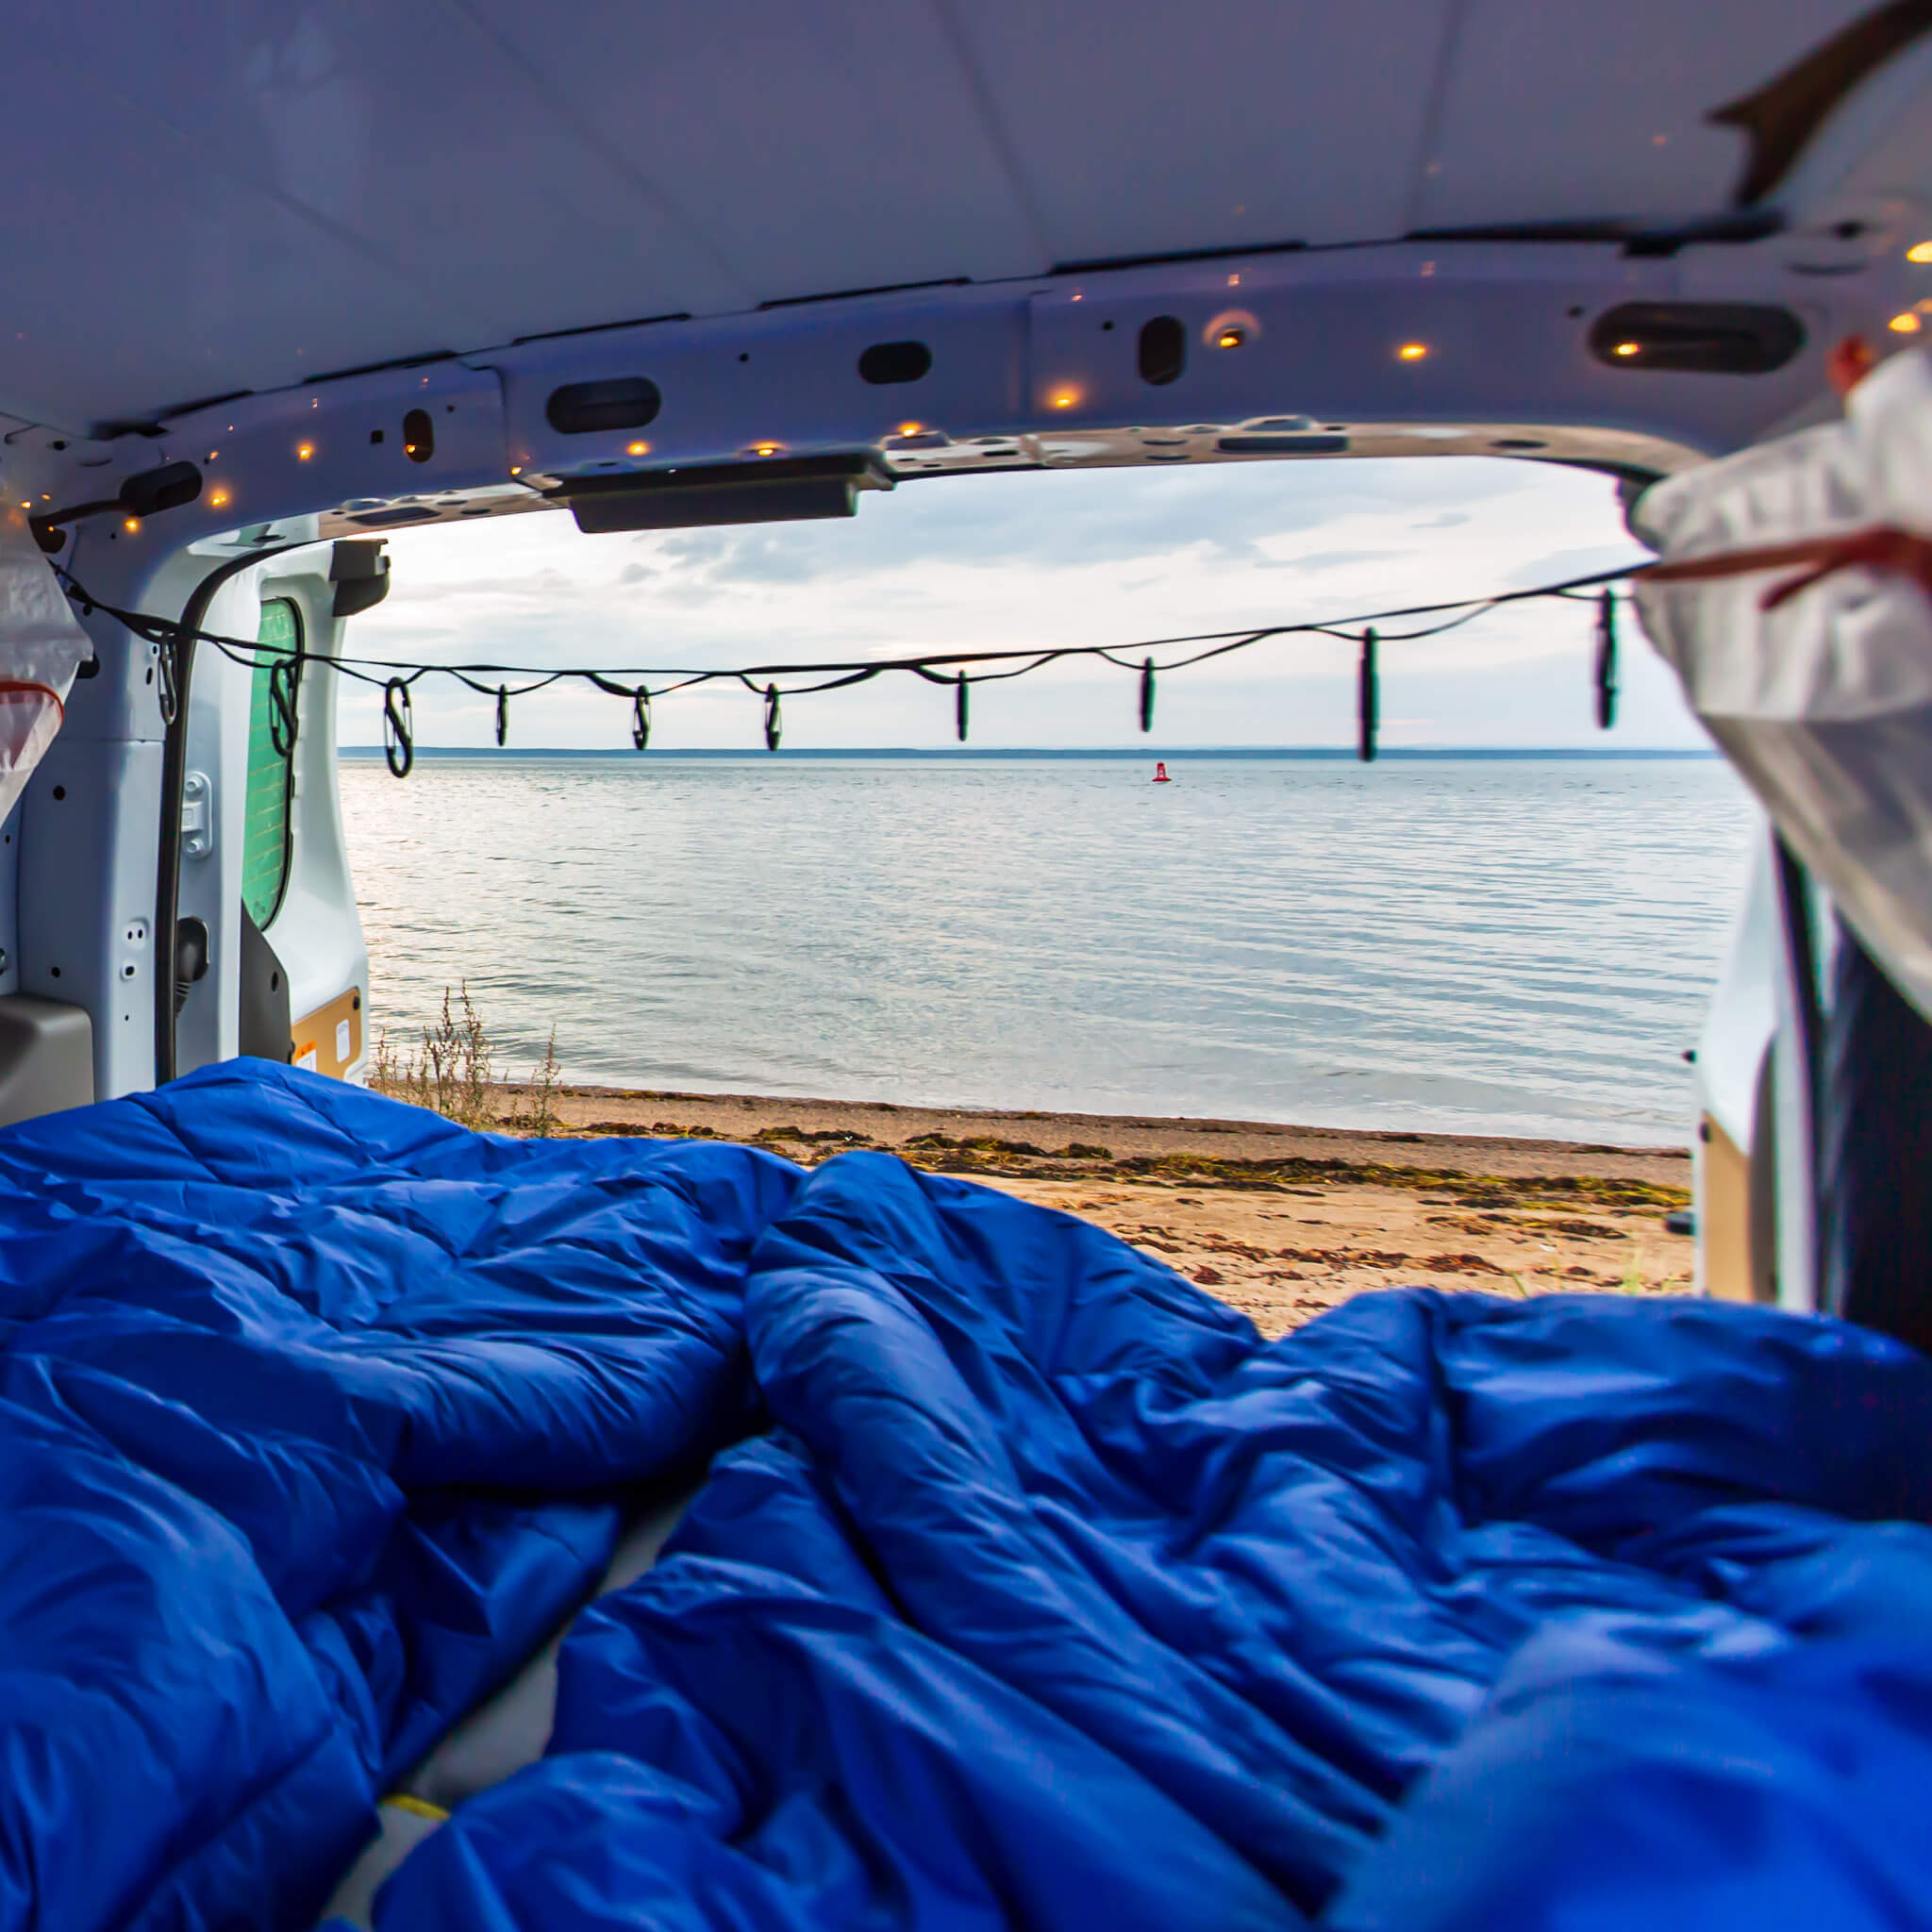 View of the beach along the St. Lawrence river from the inside of a Transit Connect camper van conversion